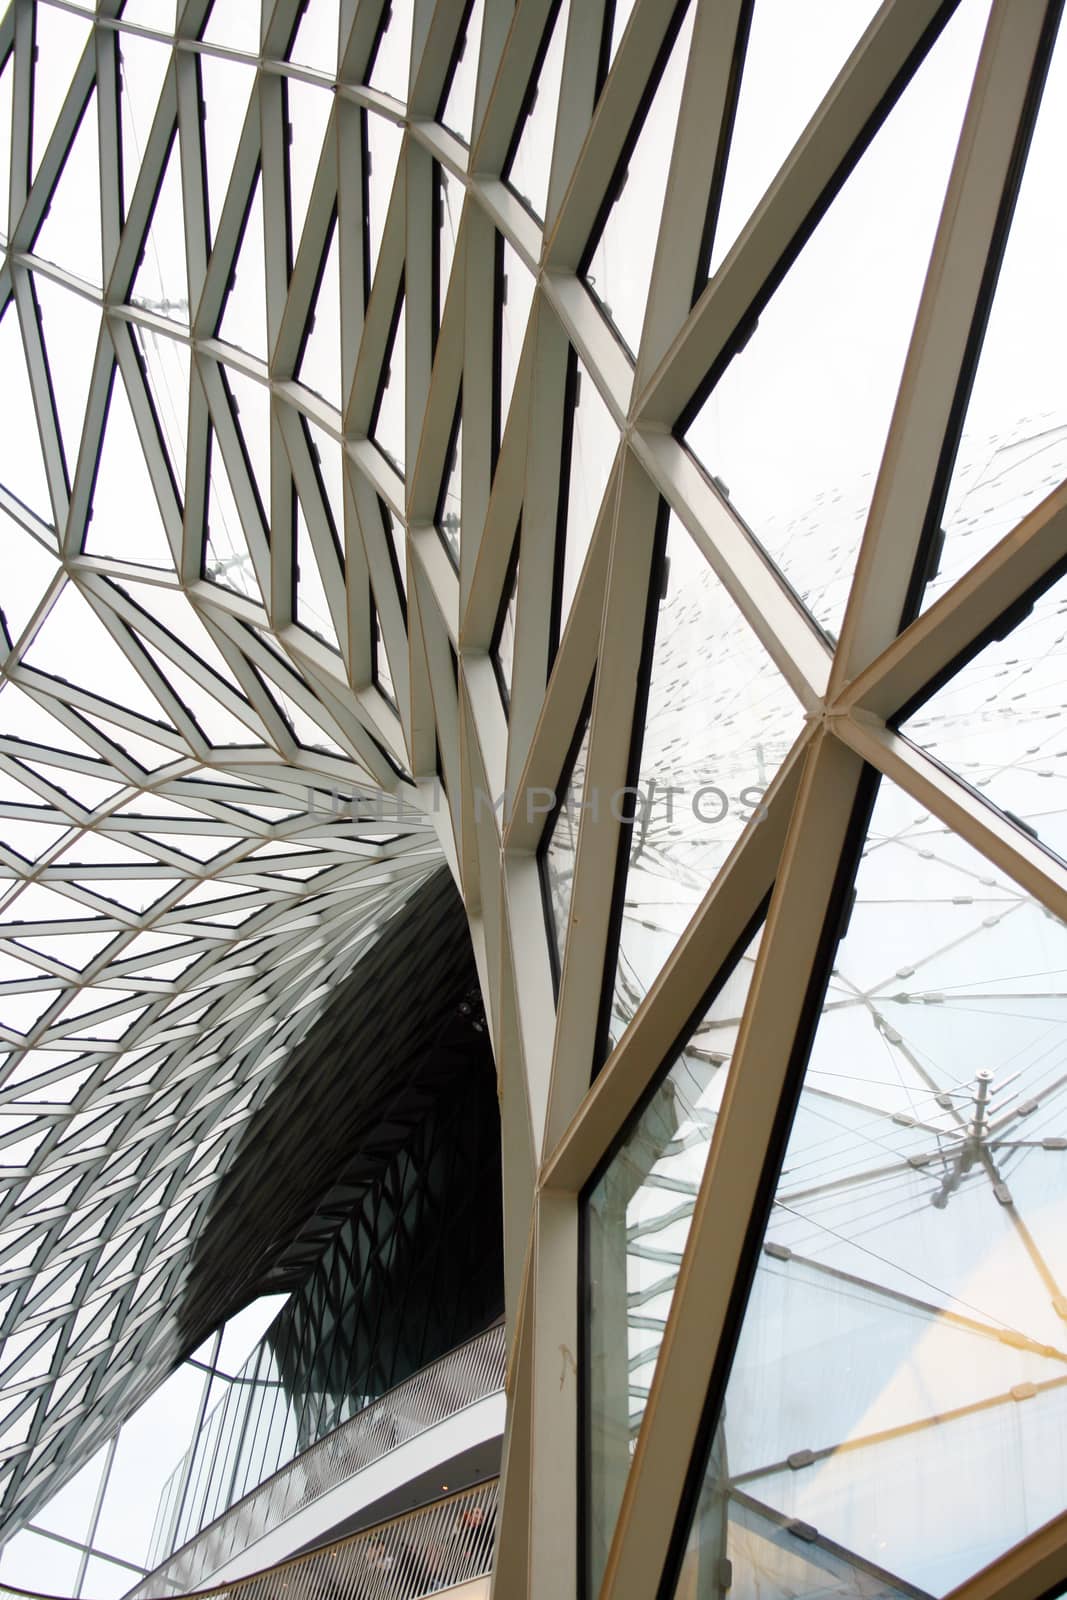 FRANKFURT AM MAIN, GERMANY, MAY The 3rd 2014: 
The MyZeil is a shopping mall in the city center of Frankfurt am Main, designed by Roman architect Massimiliano Fuksas.